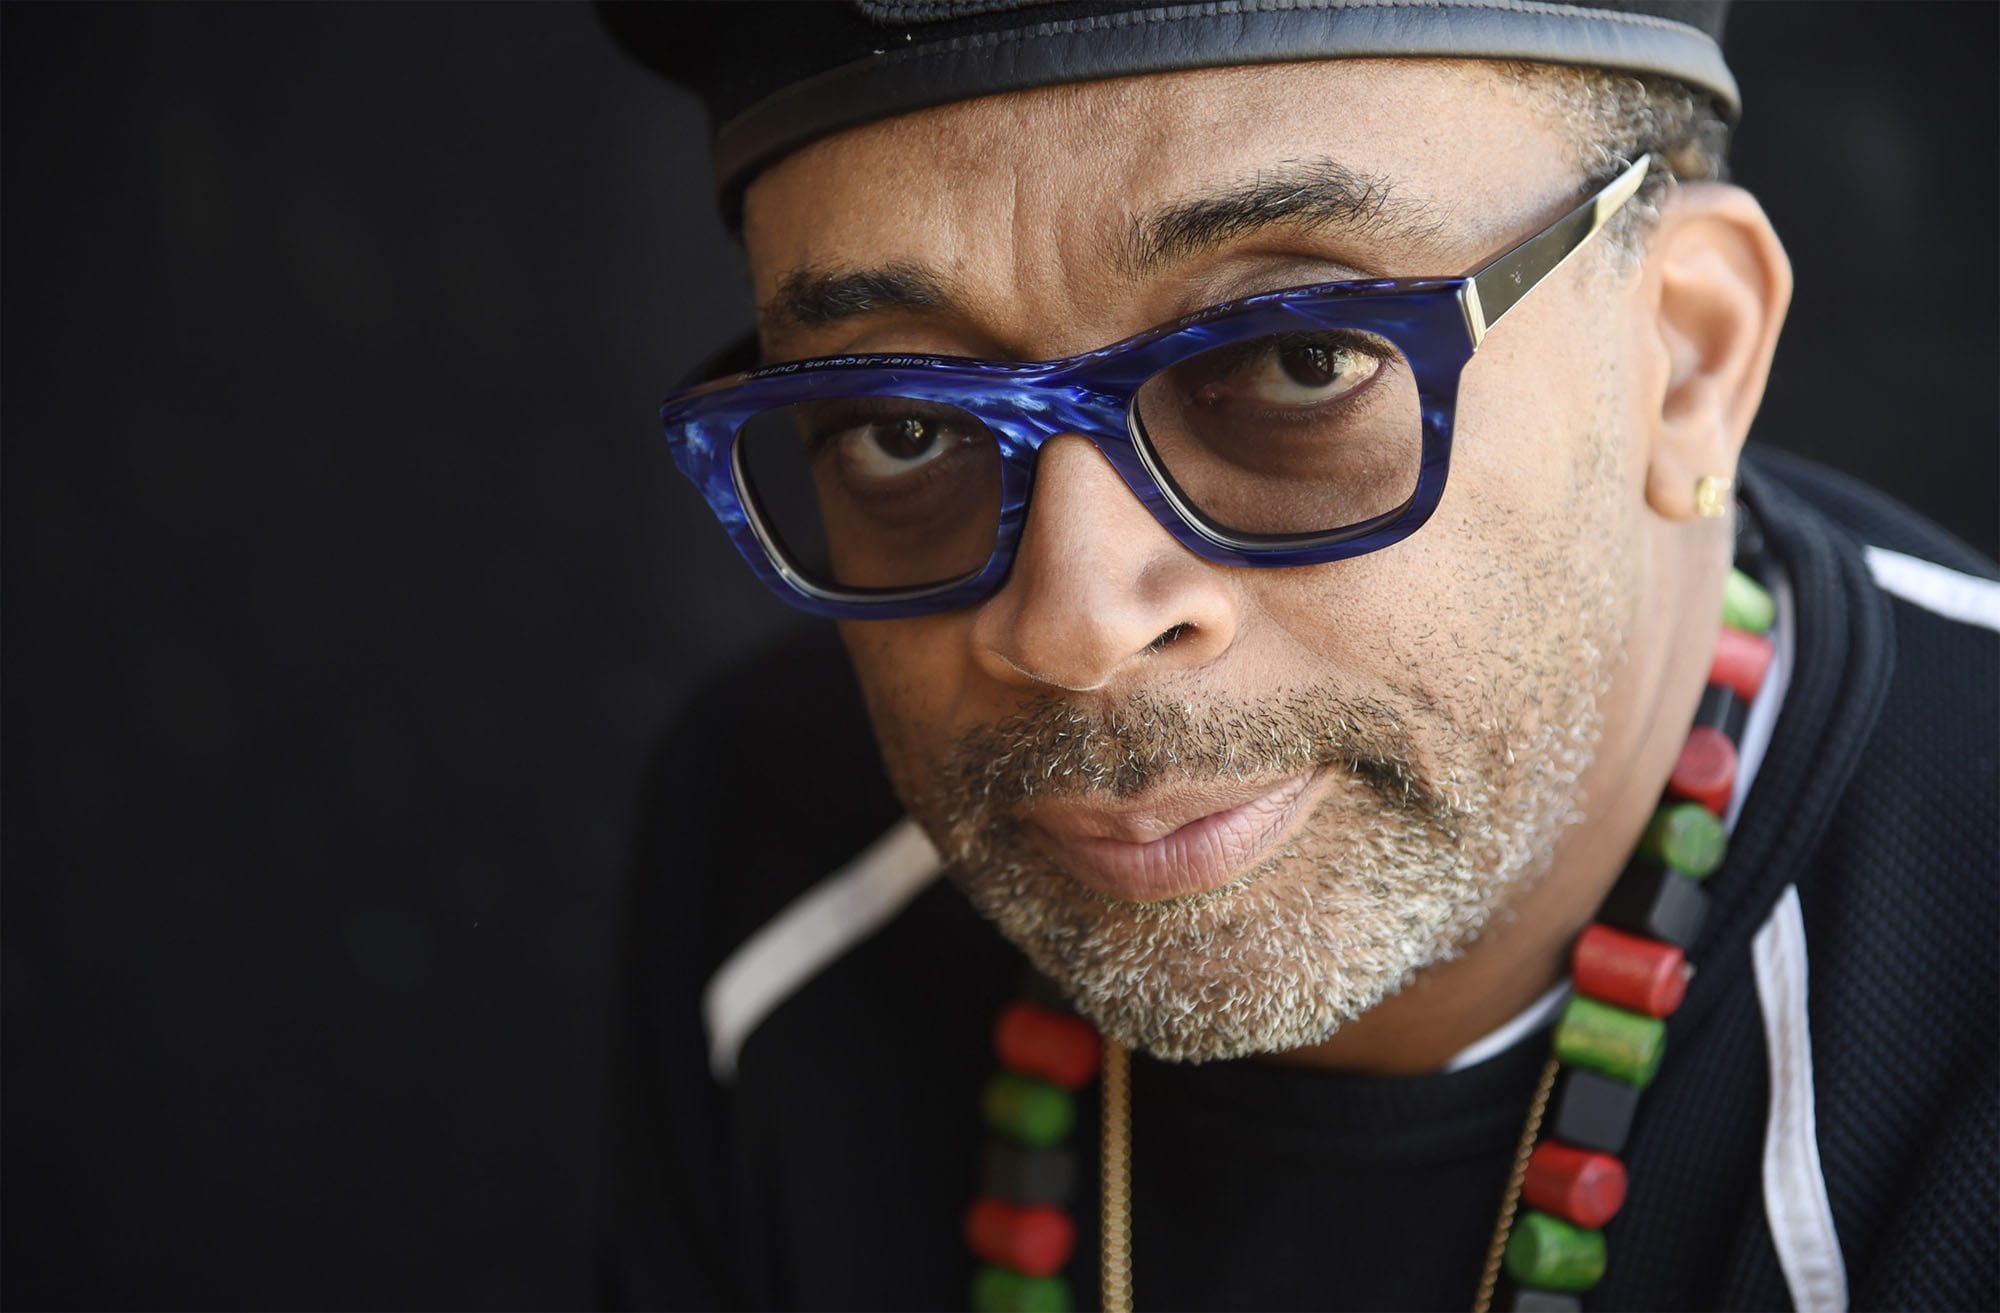 To celebrate 'BlacKkKlansman', we take a look back at the prolific career of its talented filmmaker. Here's our list of Spike Lee’s ten greatest hits.